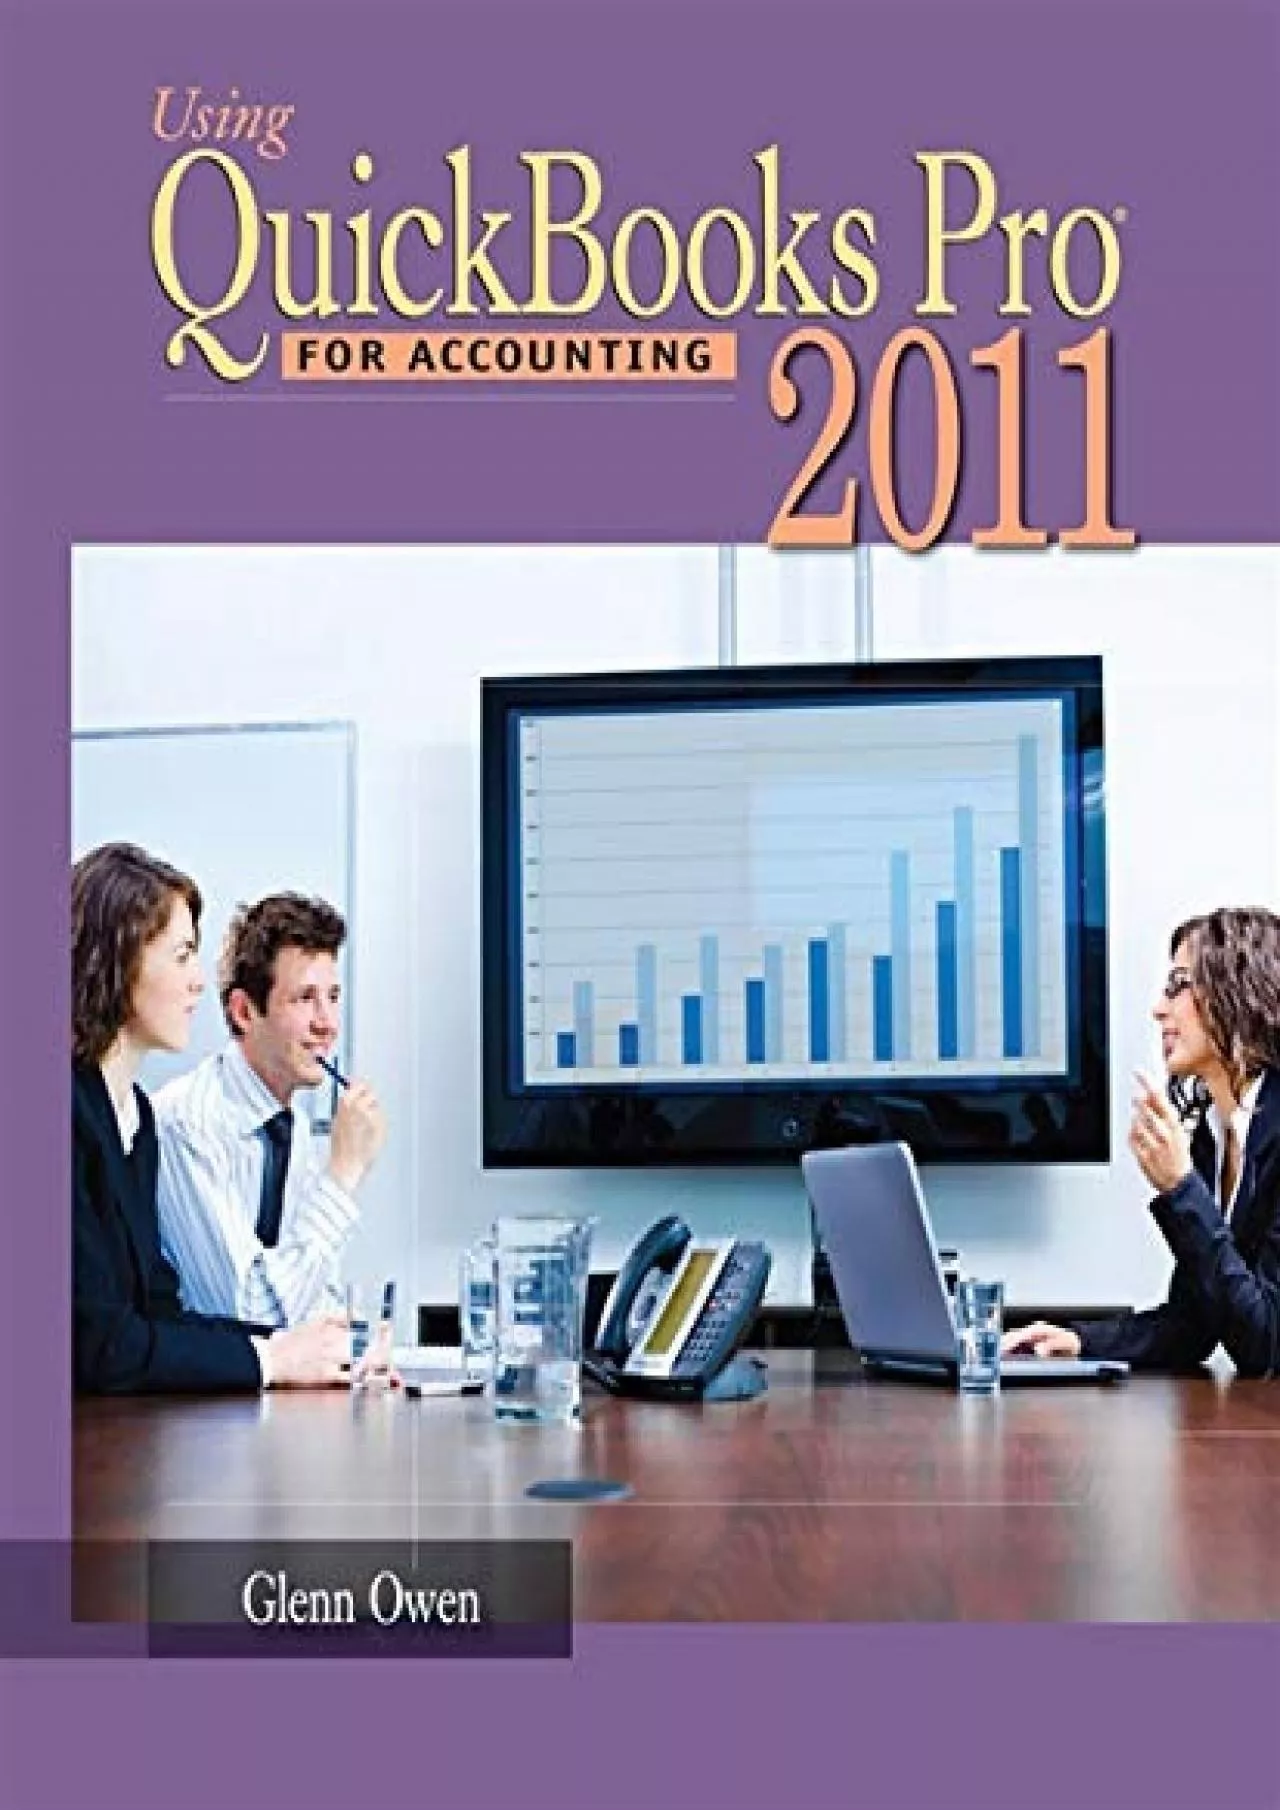 (BOOK)-Using Quickbooks Pro 2011 for Accounting (with CD-ROM) (DECA)